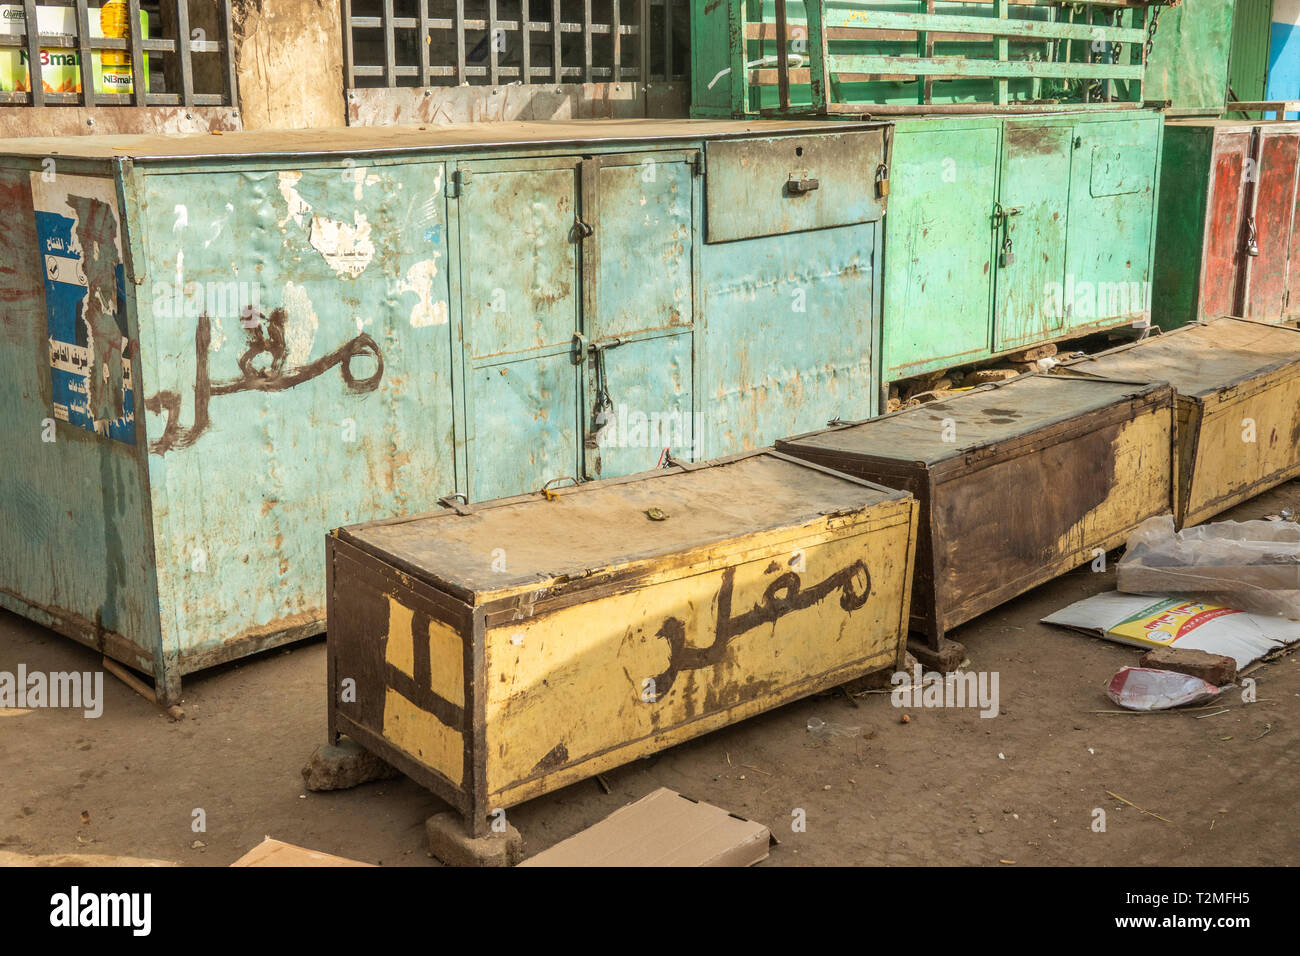 Nuri, Sudanm February 7., 2019: Market crates secured with padlocks at a market in a village in Sudan- Stock Photo